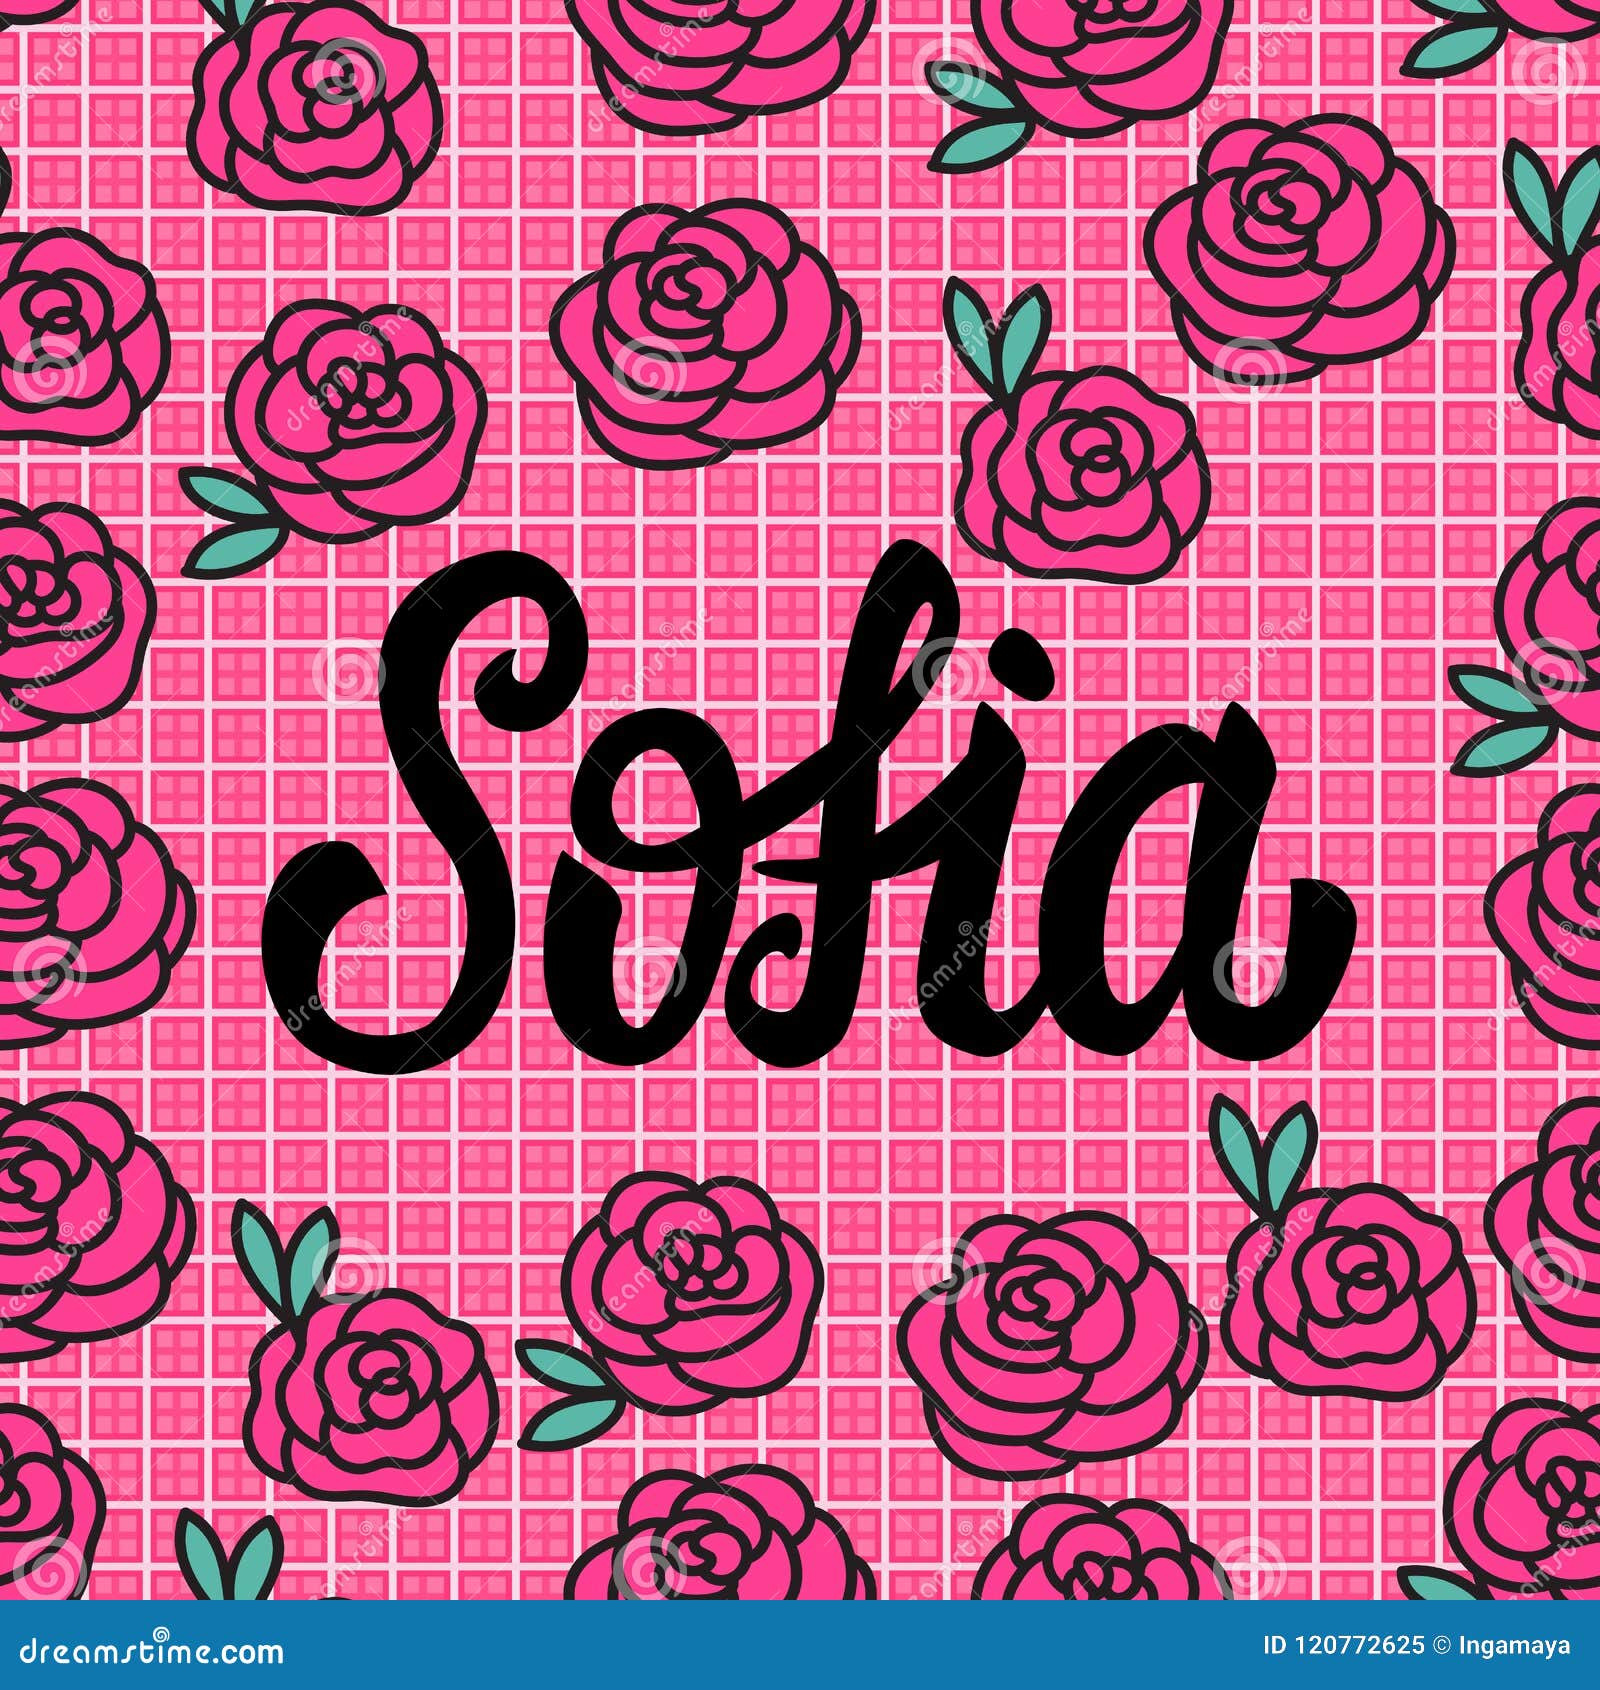 Sofia Name Card With Lovely Pink Roses Vector Illustration Stock Vector Illustration Of Girl Female